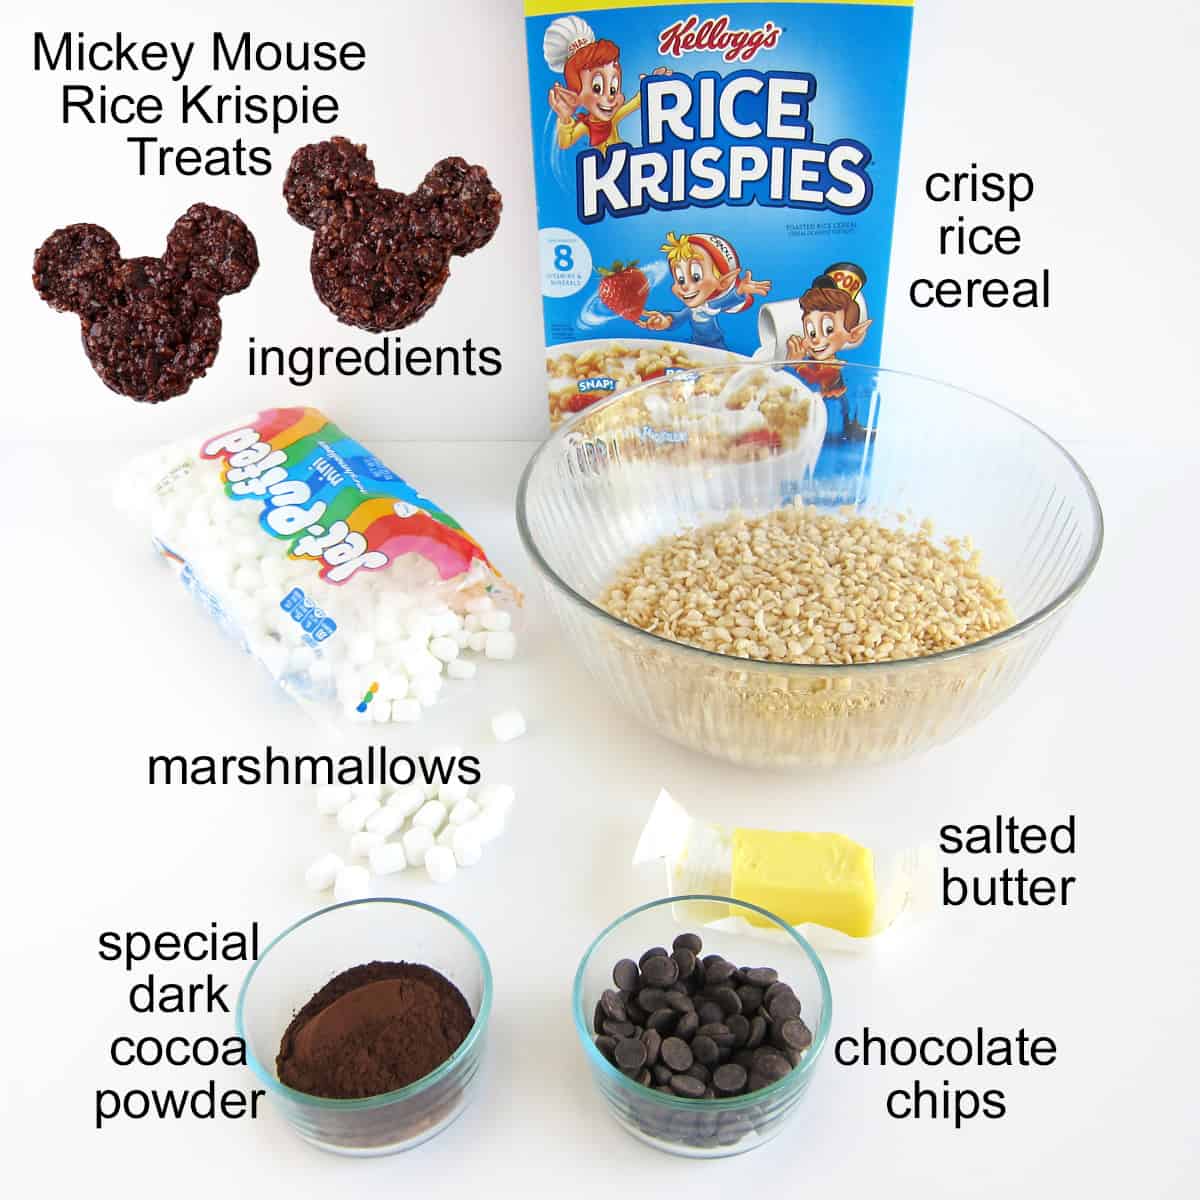 Mickey Mouse Rice Treats ingredients indcluding Rice Krispies, marshmallows, butter, cocoa powder, and chocolate chips